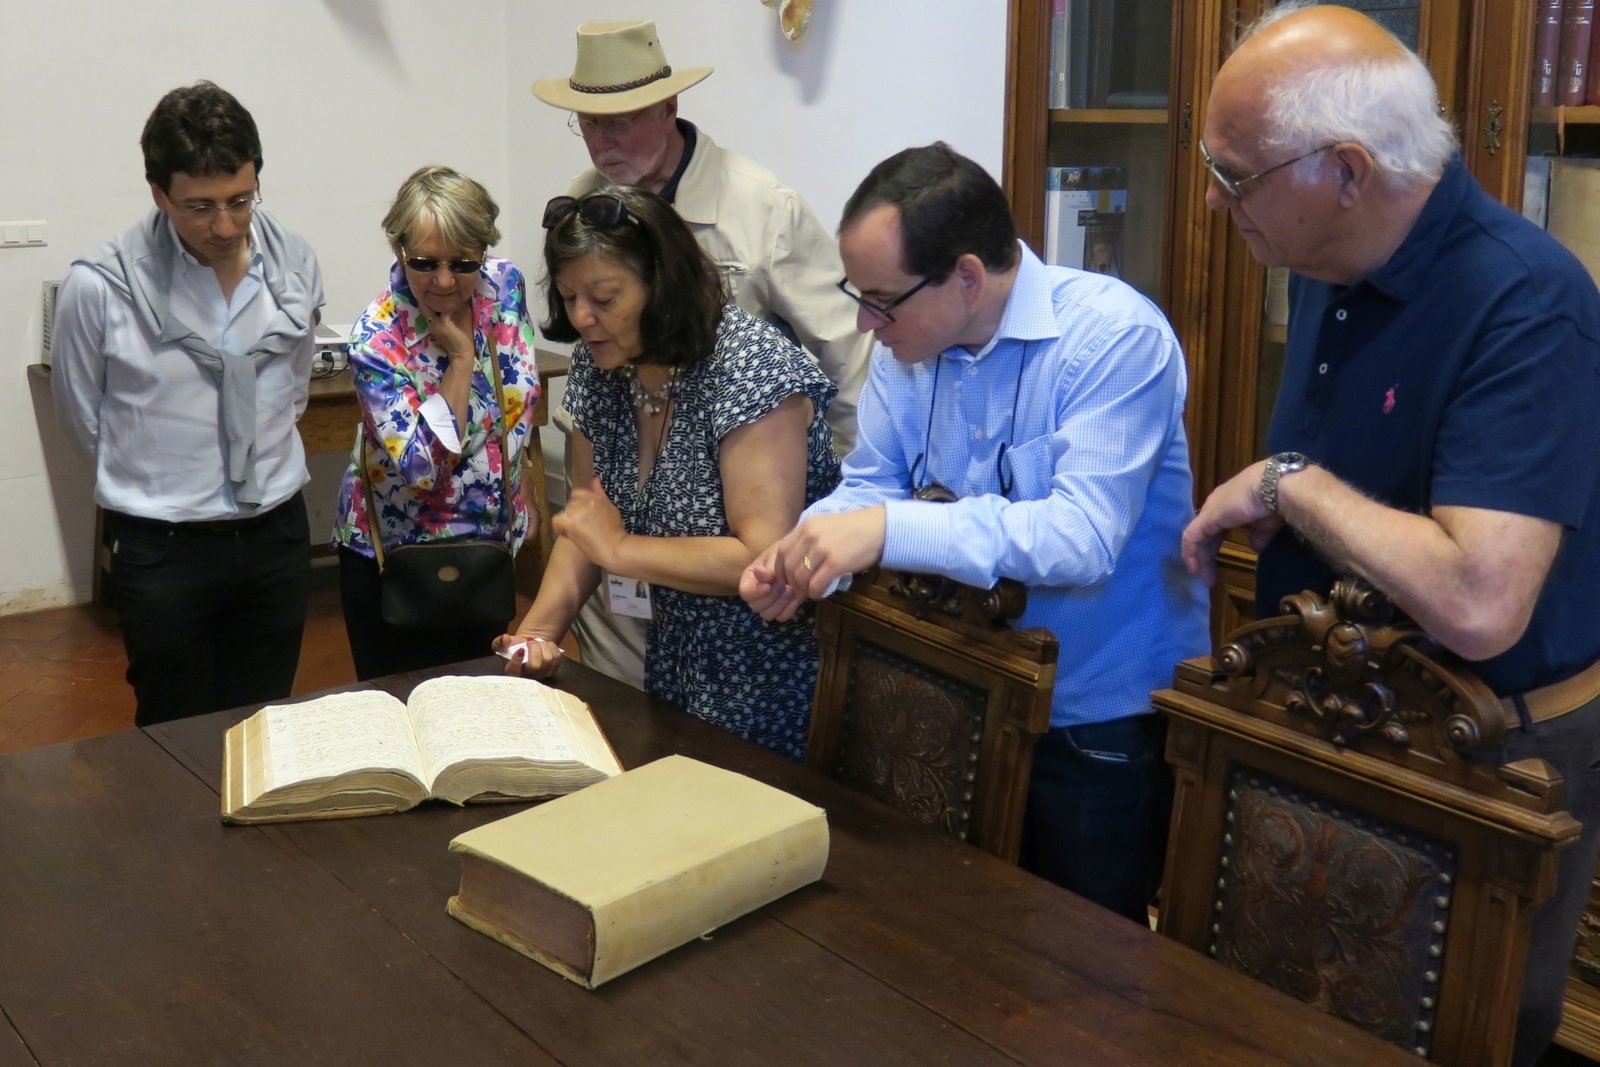 ...as well as a visit to Mafra, where we could see the inventories of the library, which were kindly explained by Dr. Maria Teresa Amaral